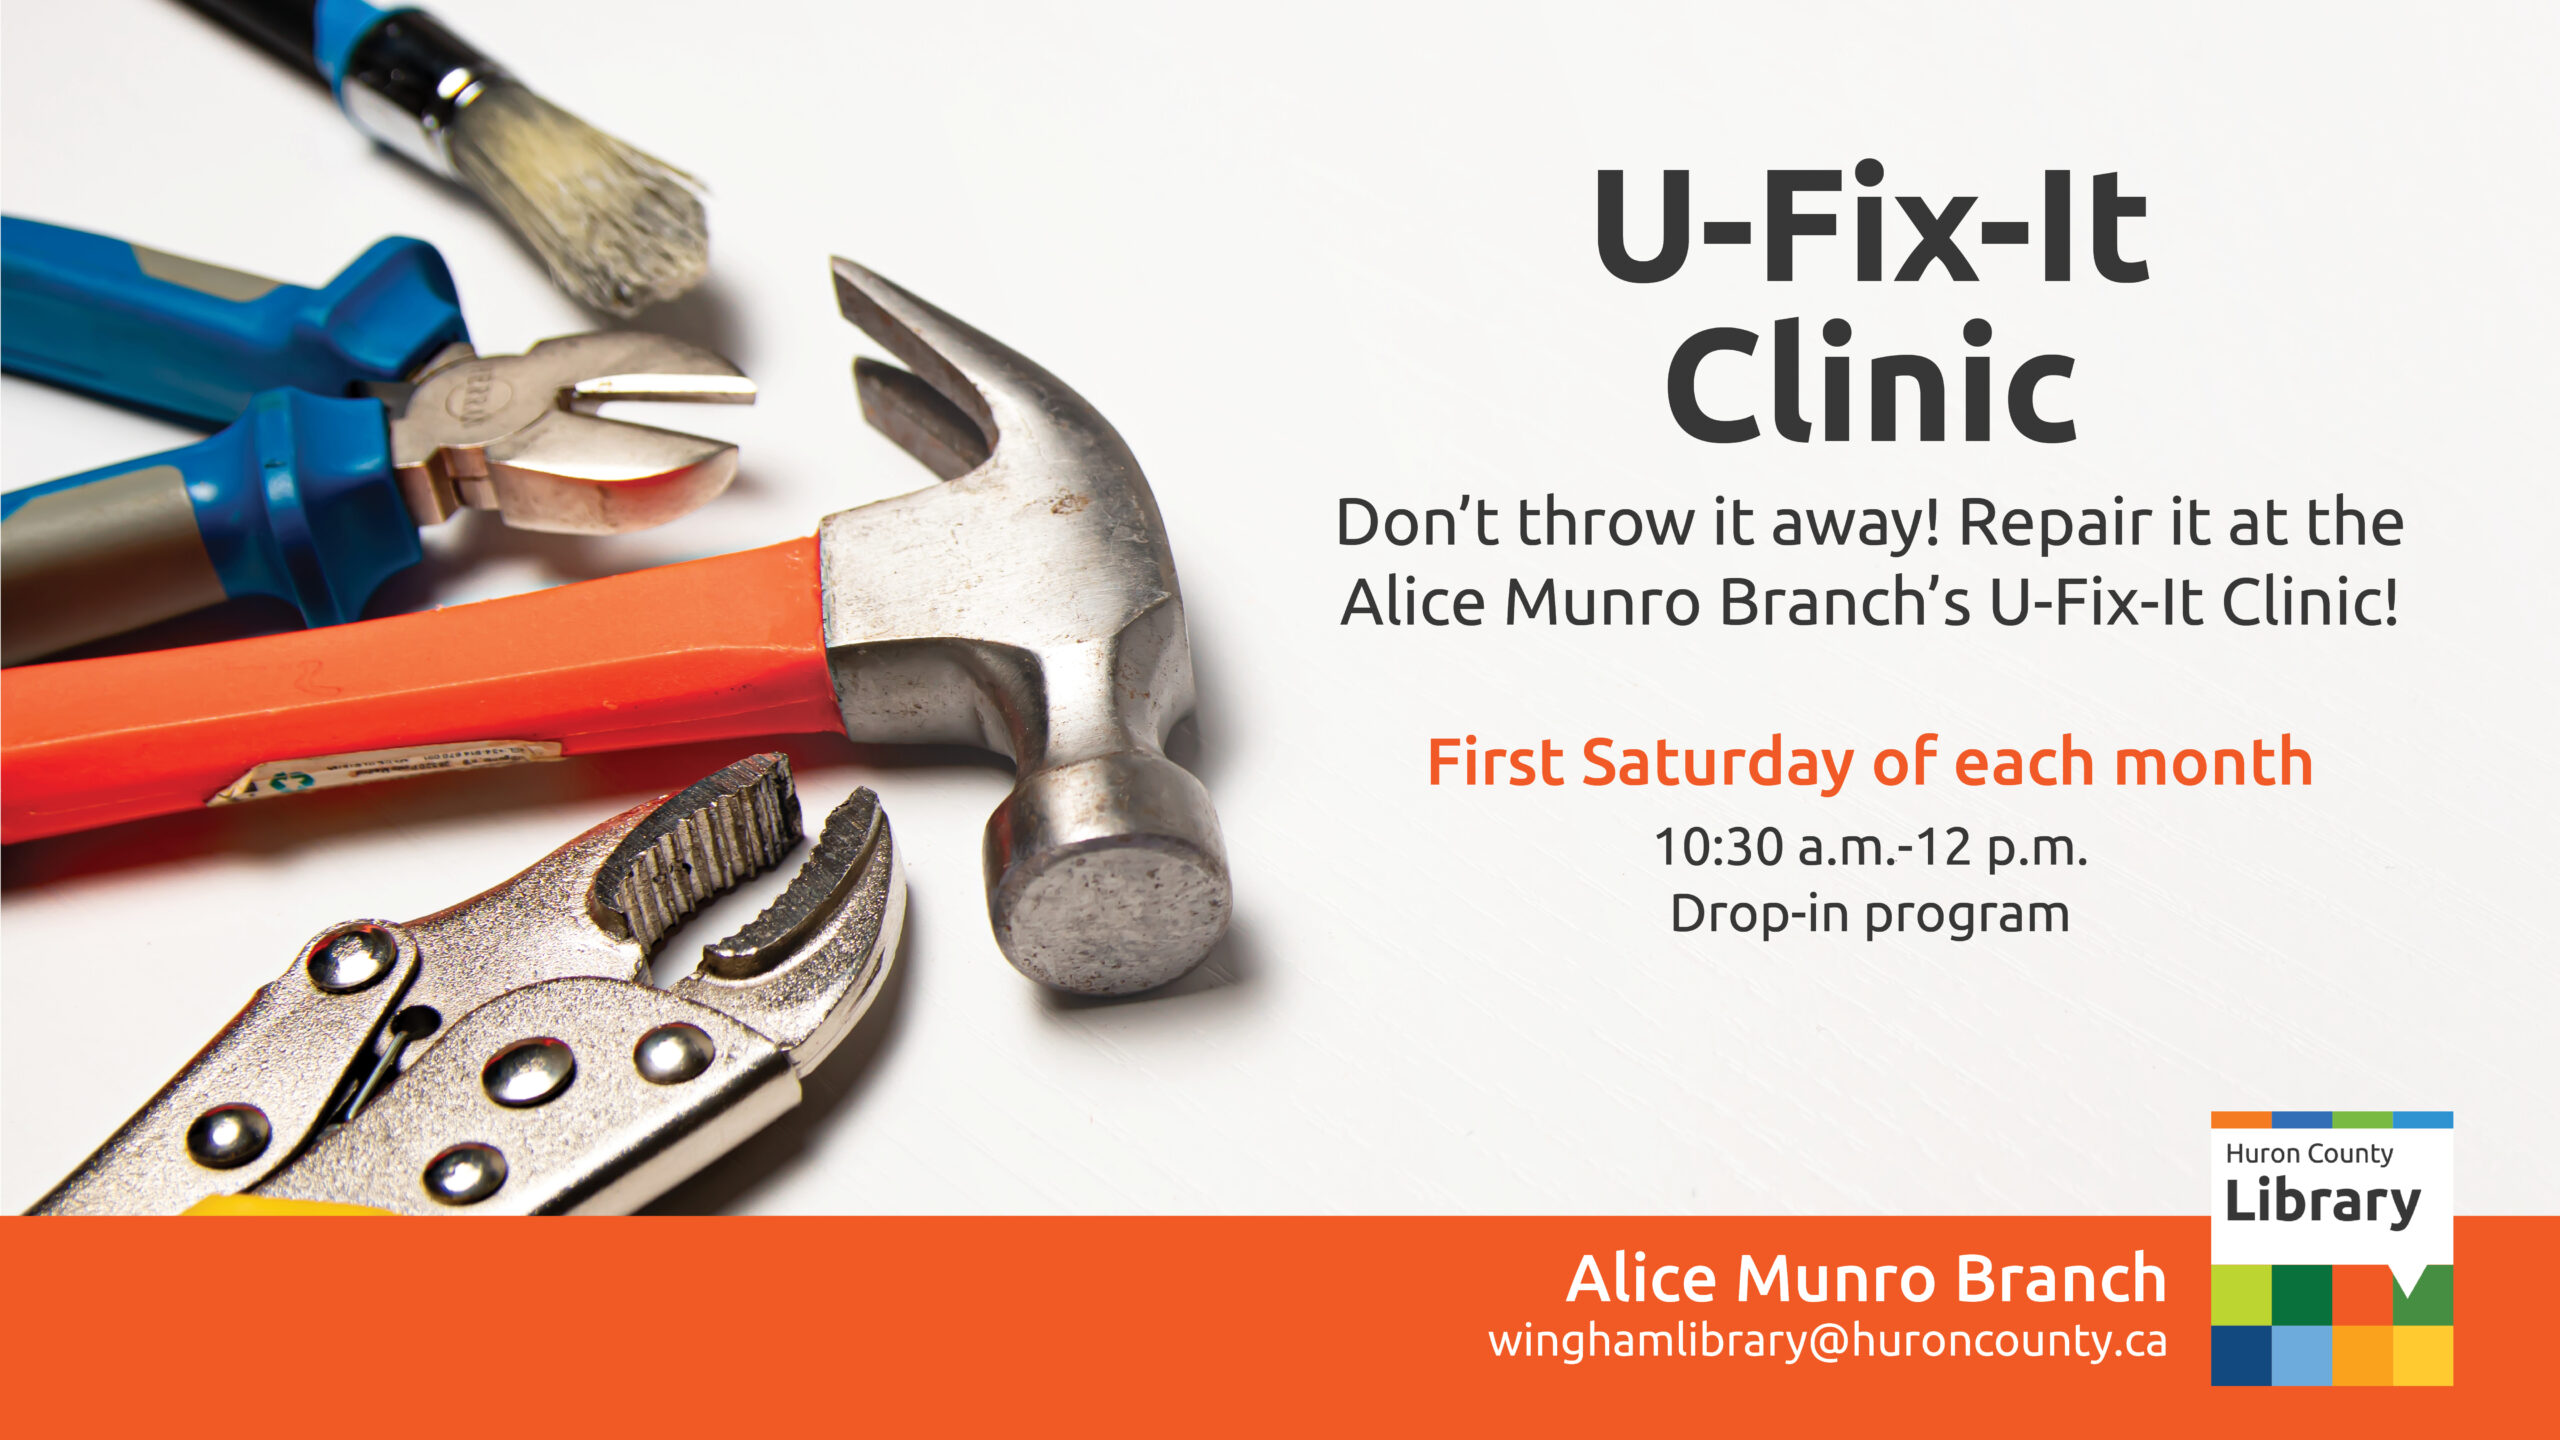 Photo of tools with text promoting U-Fix-It Clinic at Wingham